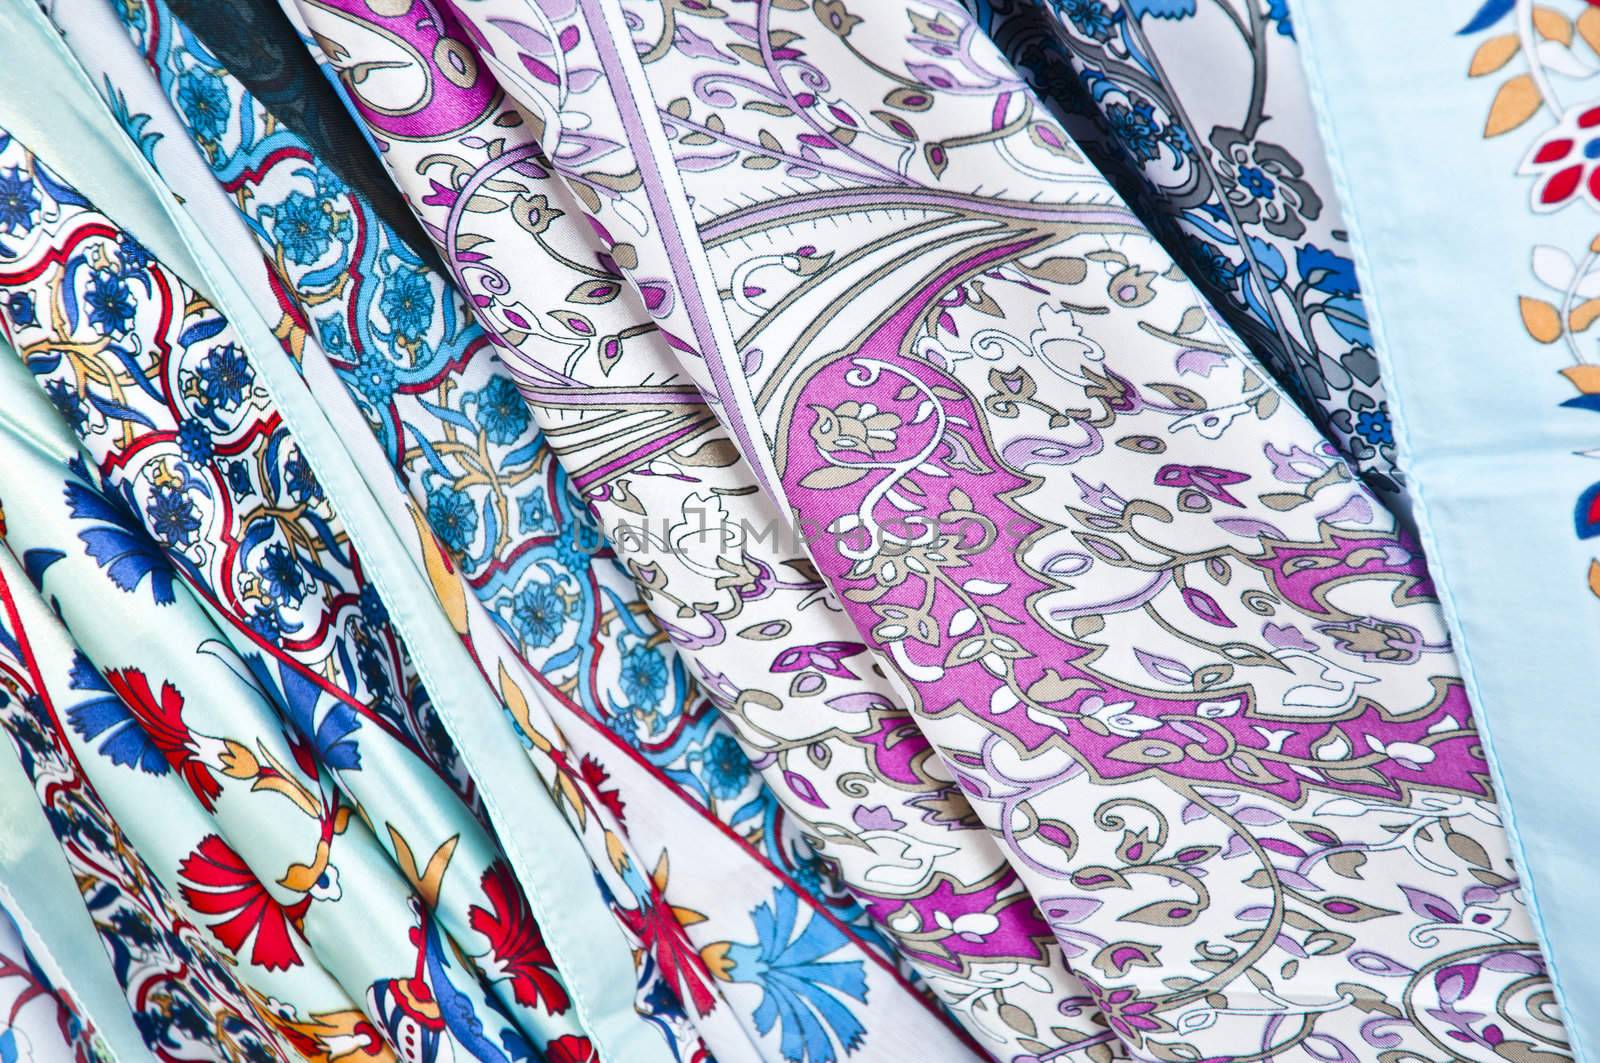 Detail from Turkish fabric with traditional floral designs